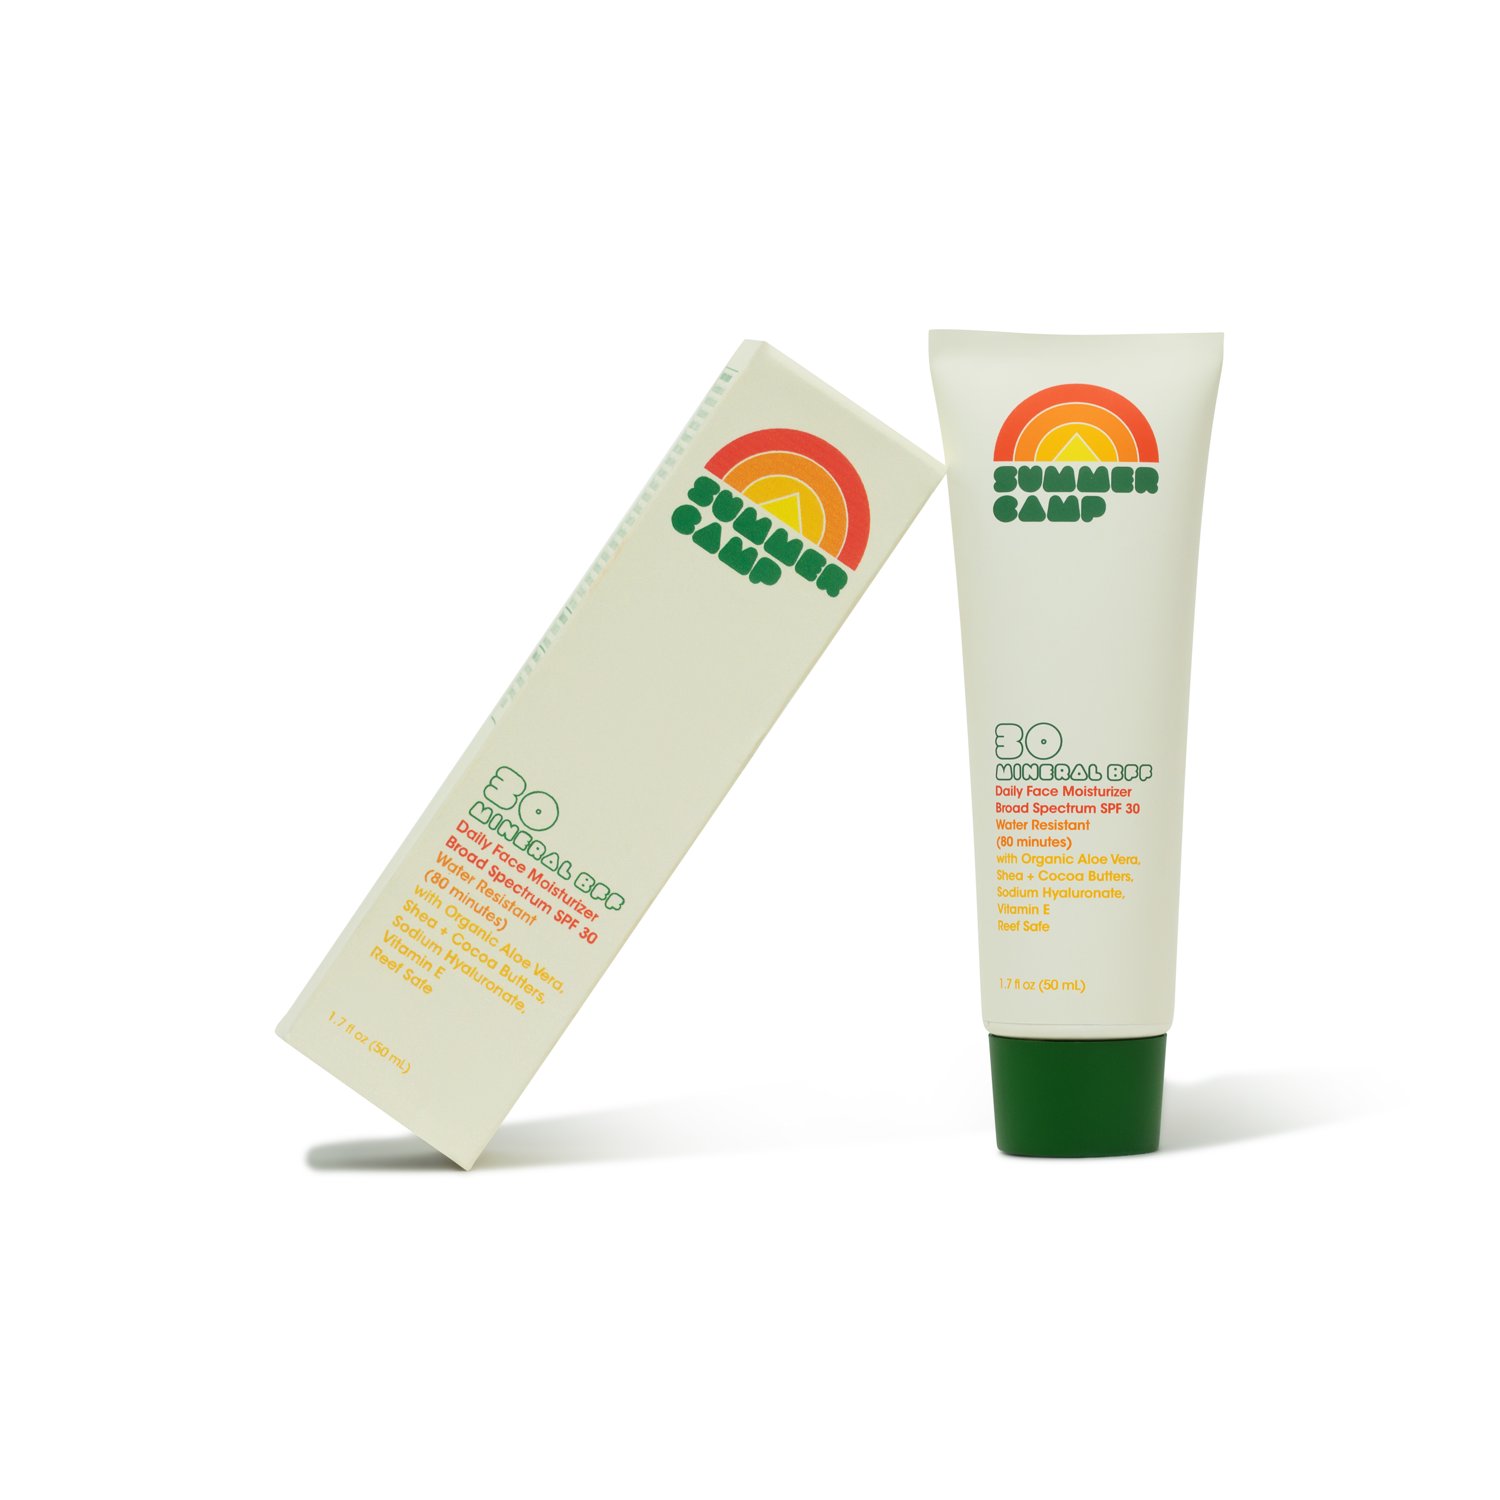 Summer Camp Mineral BFF Daily Face Moisturizer SPF 30 - image 2 of 5